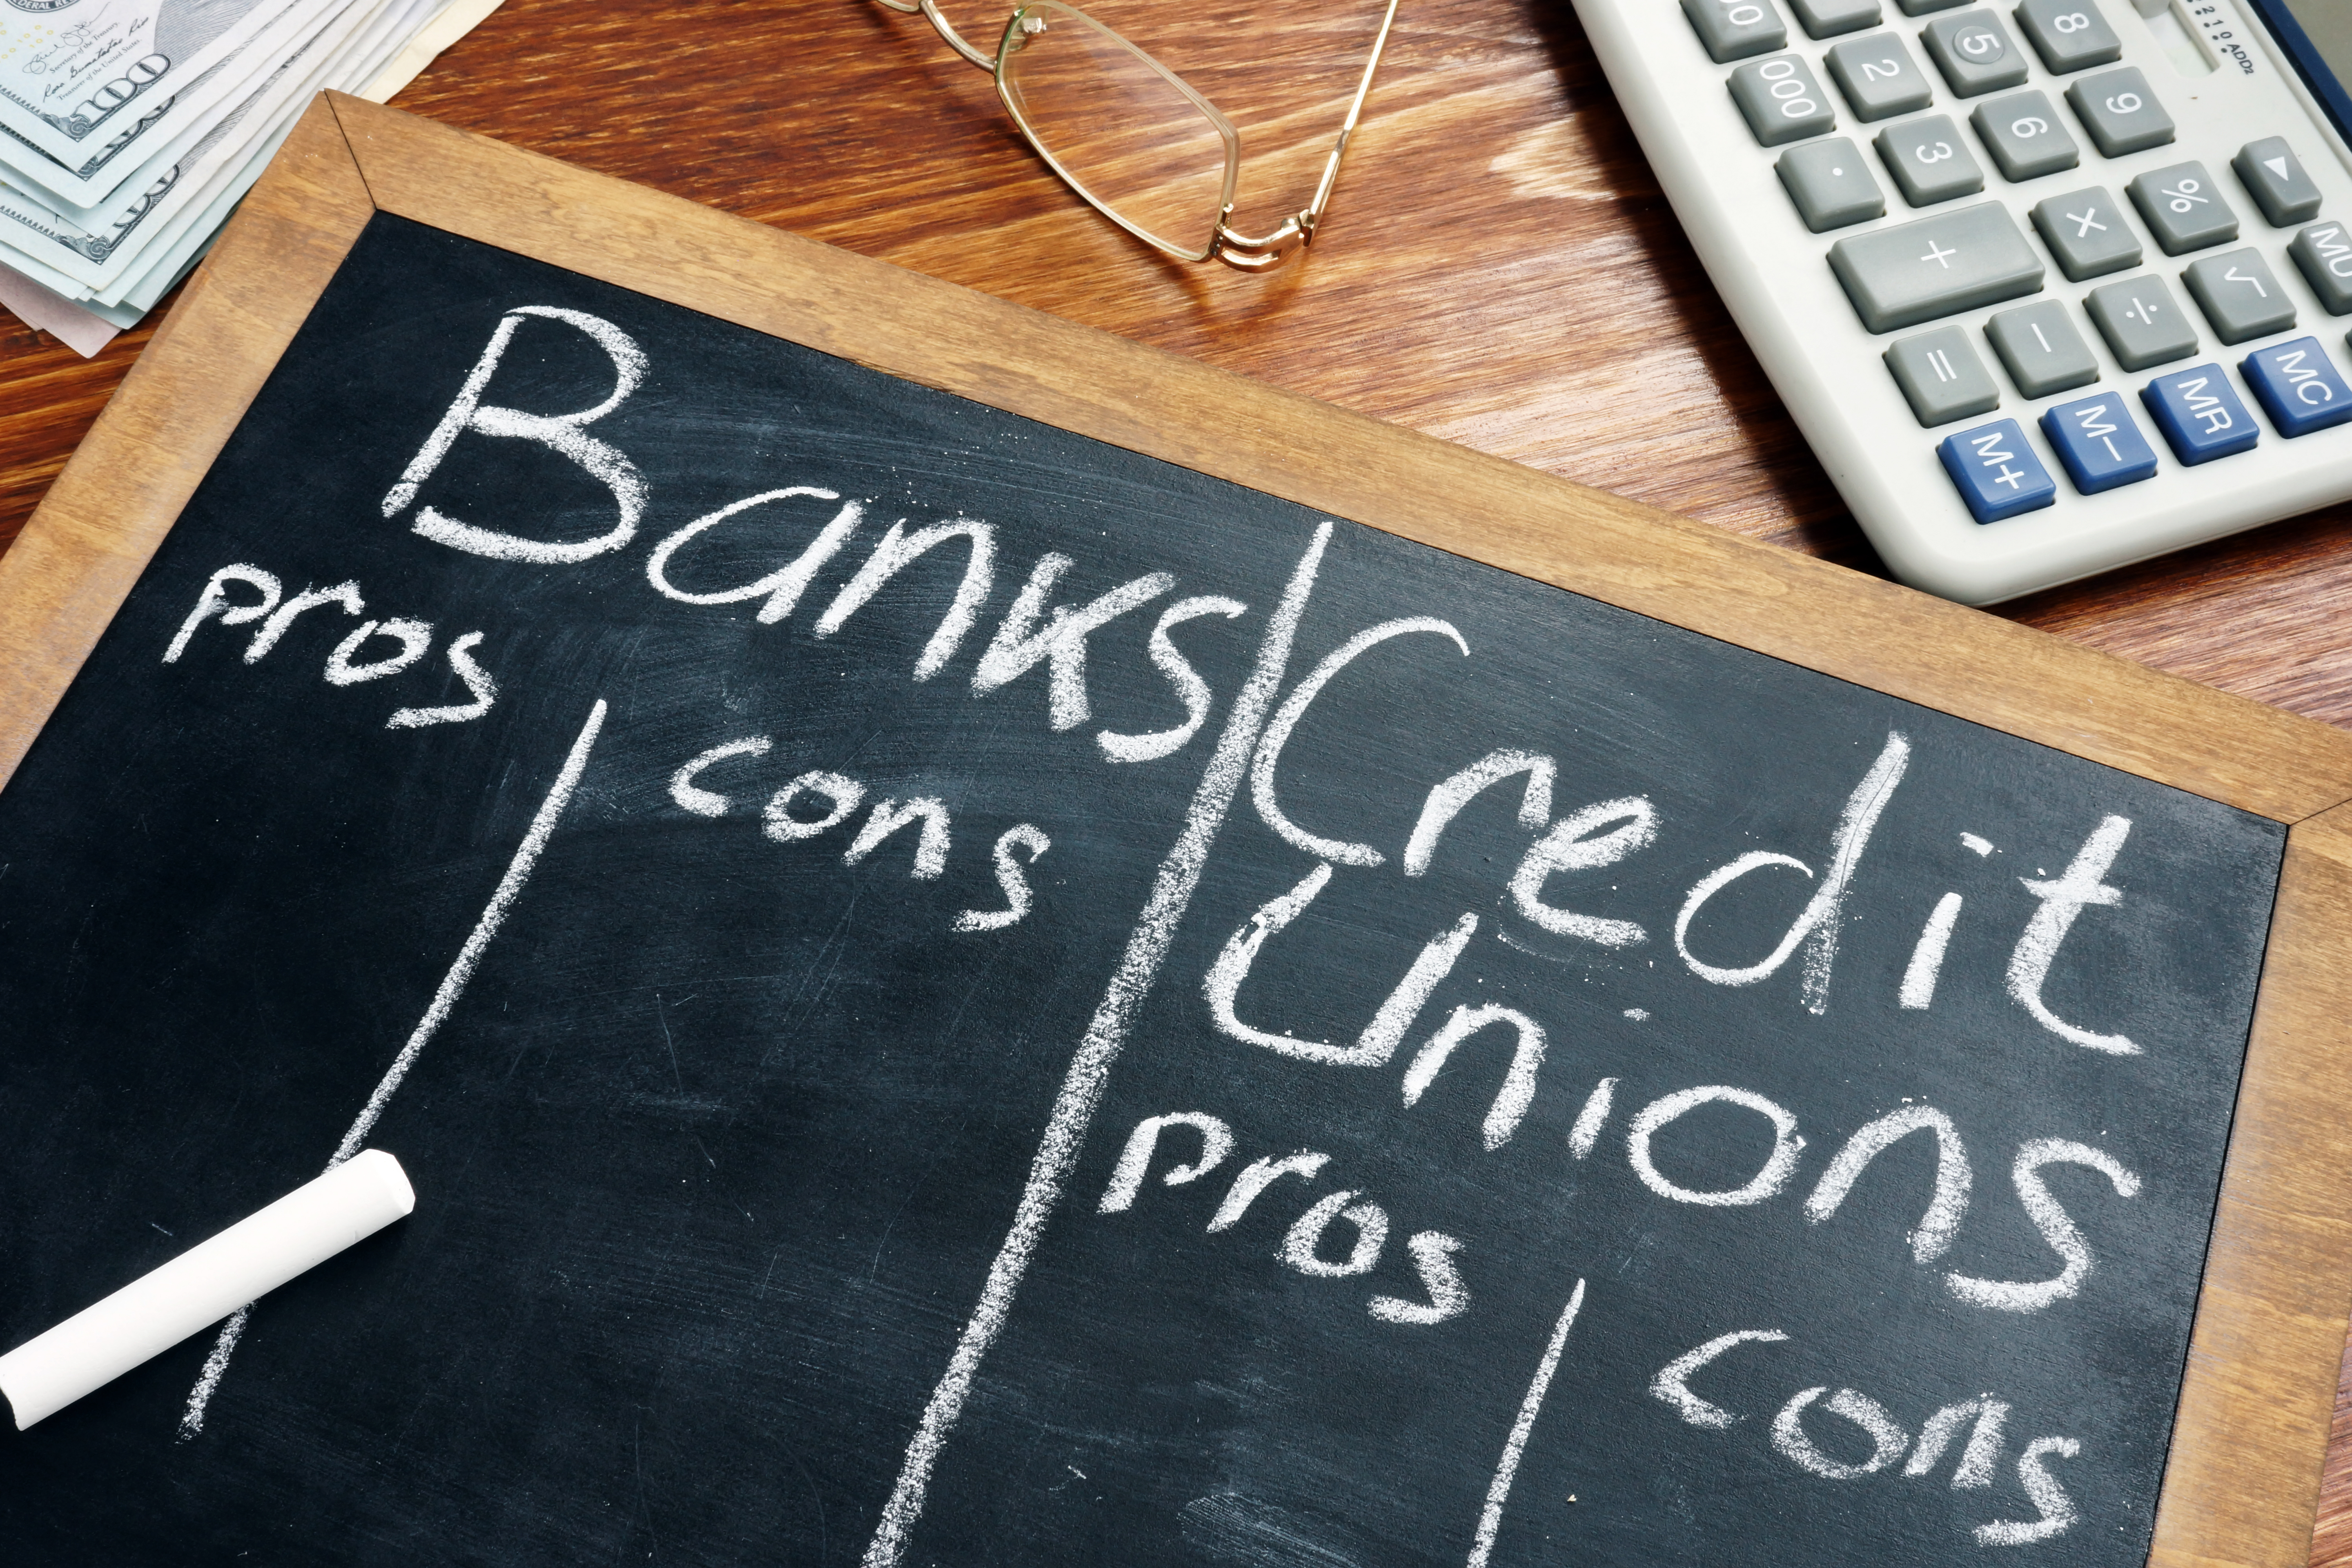 A wood table with a calculator, reading glasses, a stack of white papers surrounding a wood framed chalk board that takes up most of the image, with two columns, titled Banks and Credit Unions and drawn in white chalk. The two main columns each have Pros and Cons columns that are empty, representing what you need to know about credit unions and filing bankruptcy.